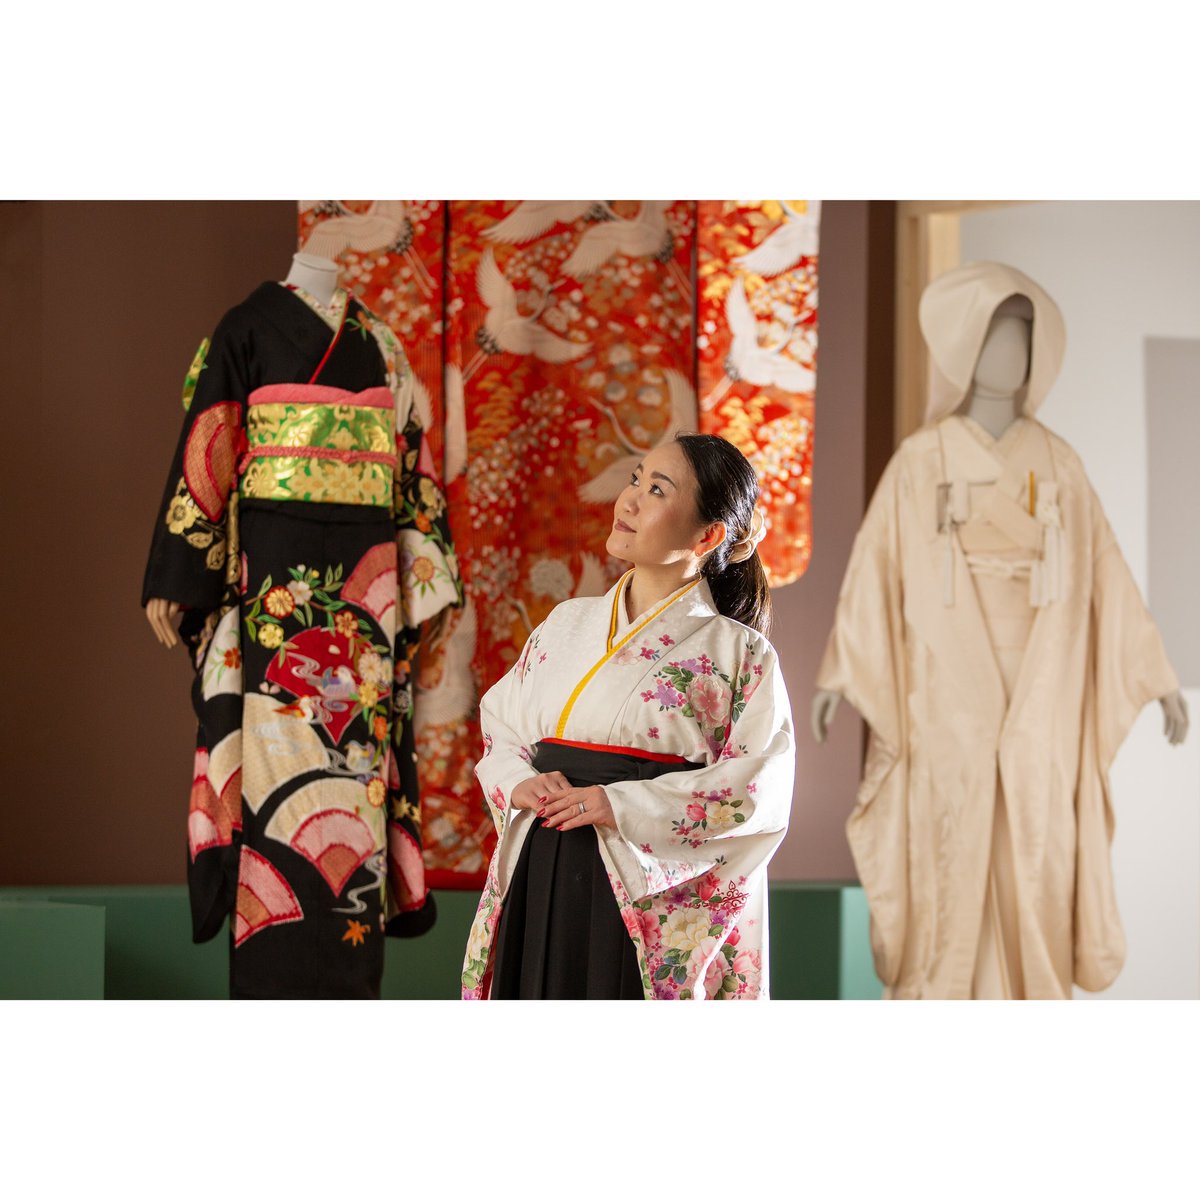 KIMONO: KYOTO TO CATWALK at V&A DUNDEE. Pictured: Japanese artist Tomoko Rowell. #vadundee #dundee #kimono #museum #people #photography #culture #scotland #canon #japan #fashion #japaneseculture